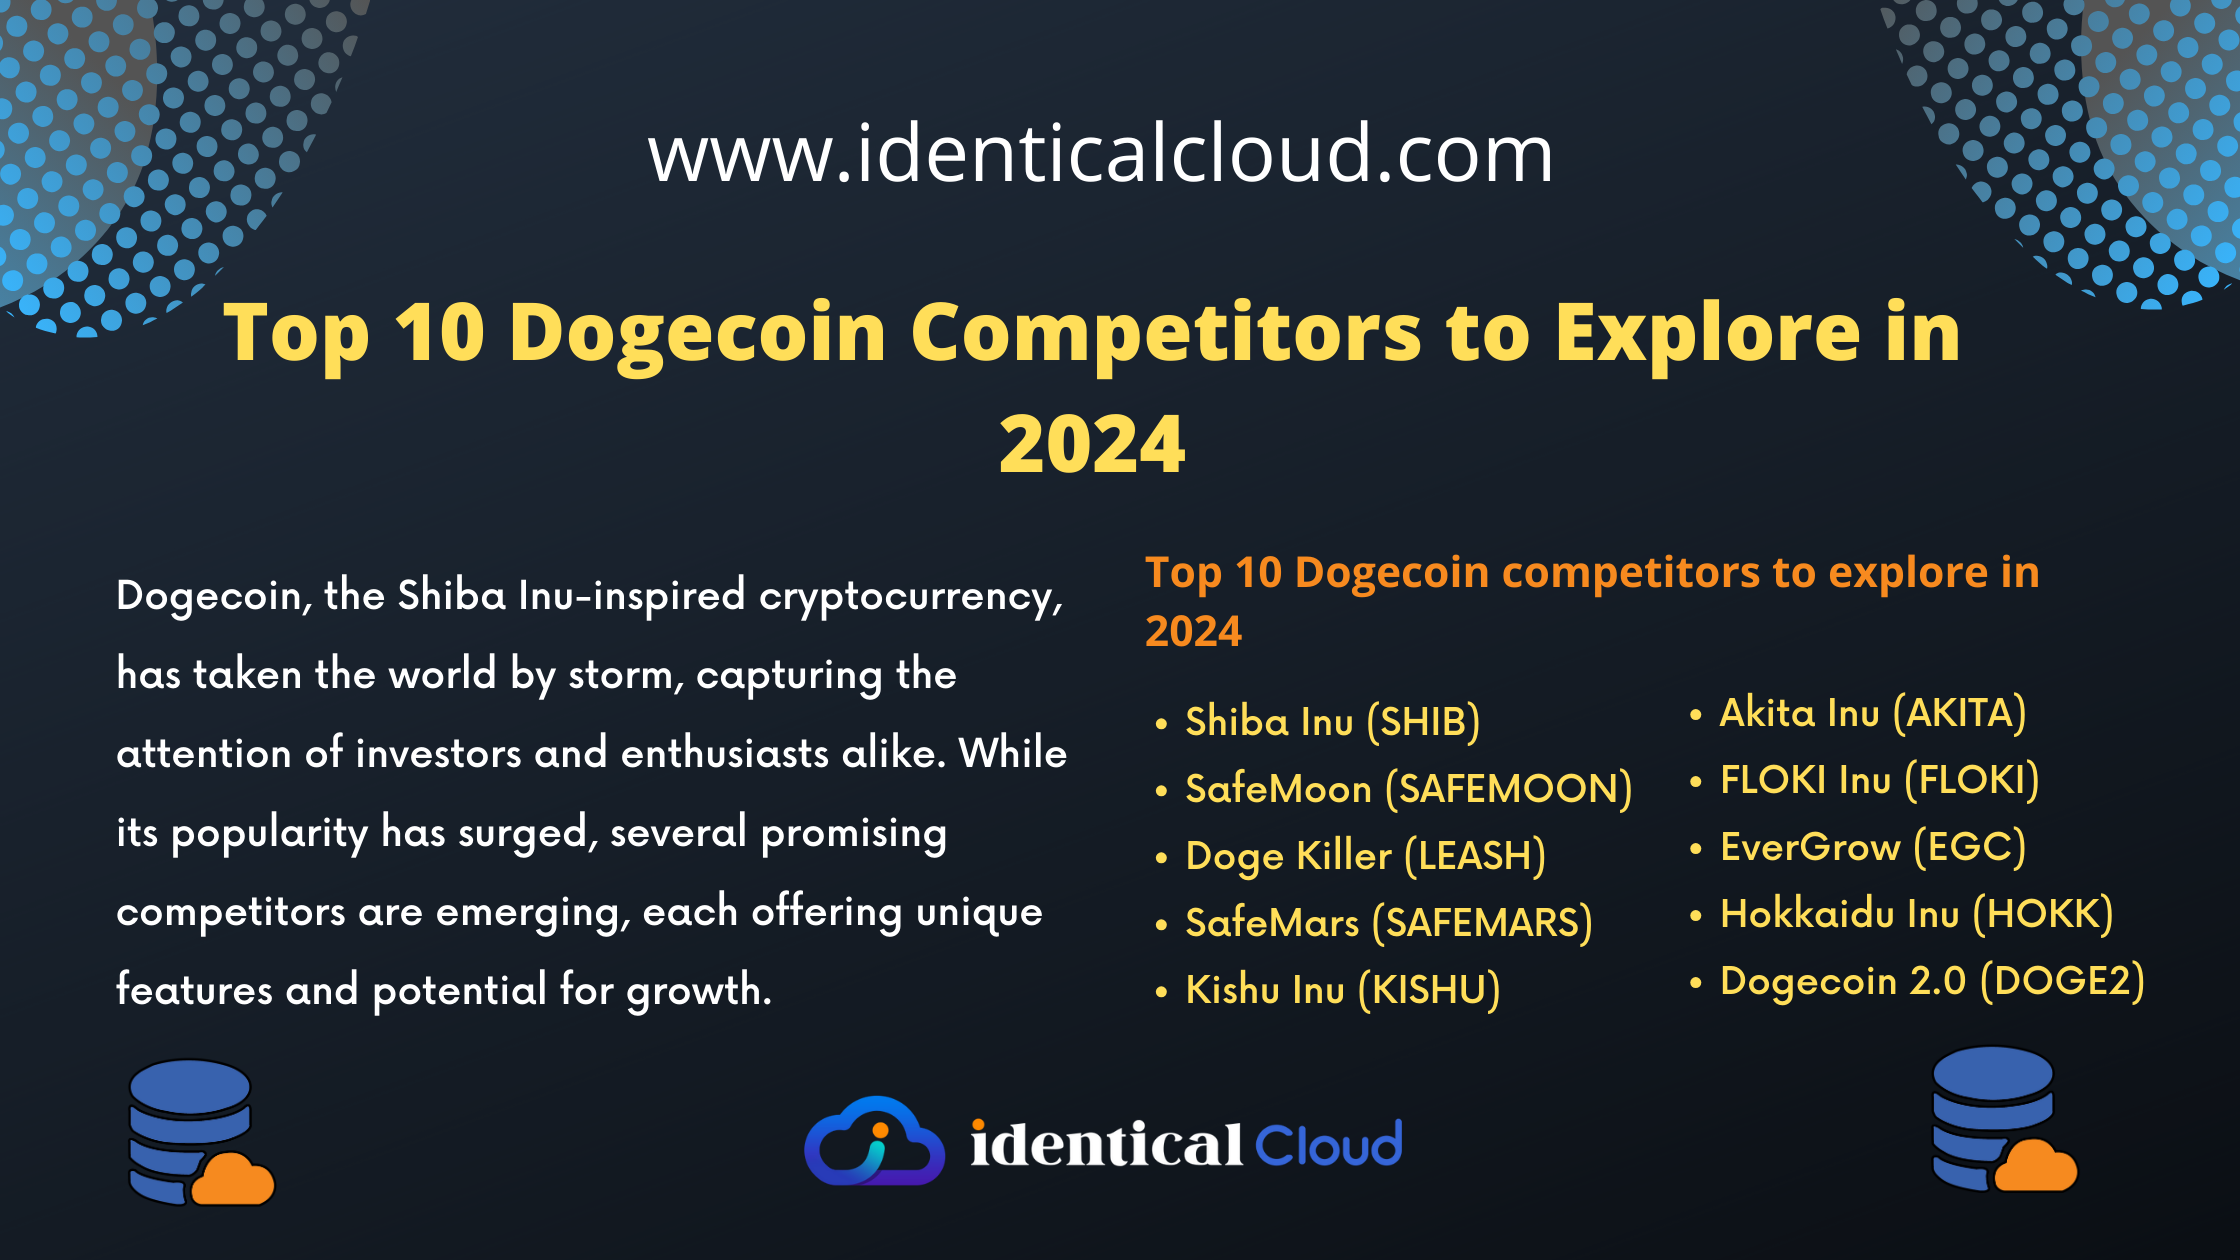 Top 10 Dogecoin Competitors to Explore in 2024 - identicalcloud.com